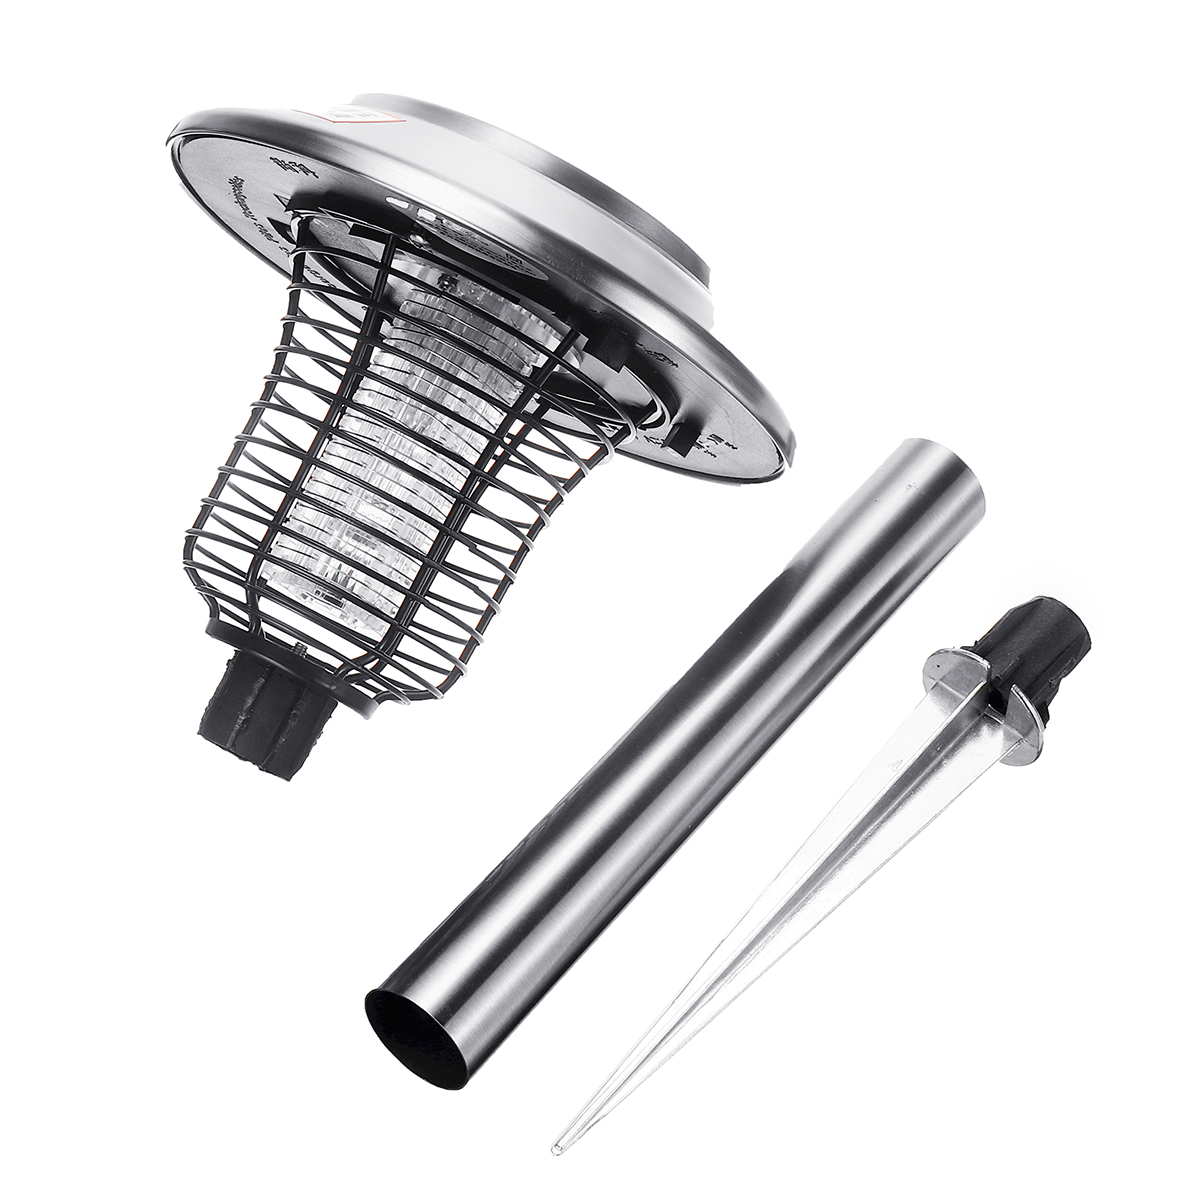 Solar-Electric-Shock-Mosquito-LED-Light-Fly-Bug-Insect-Zapper-Killer-Trap-Lamp-Intelligent-Light-con-1490338-8